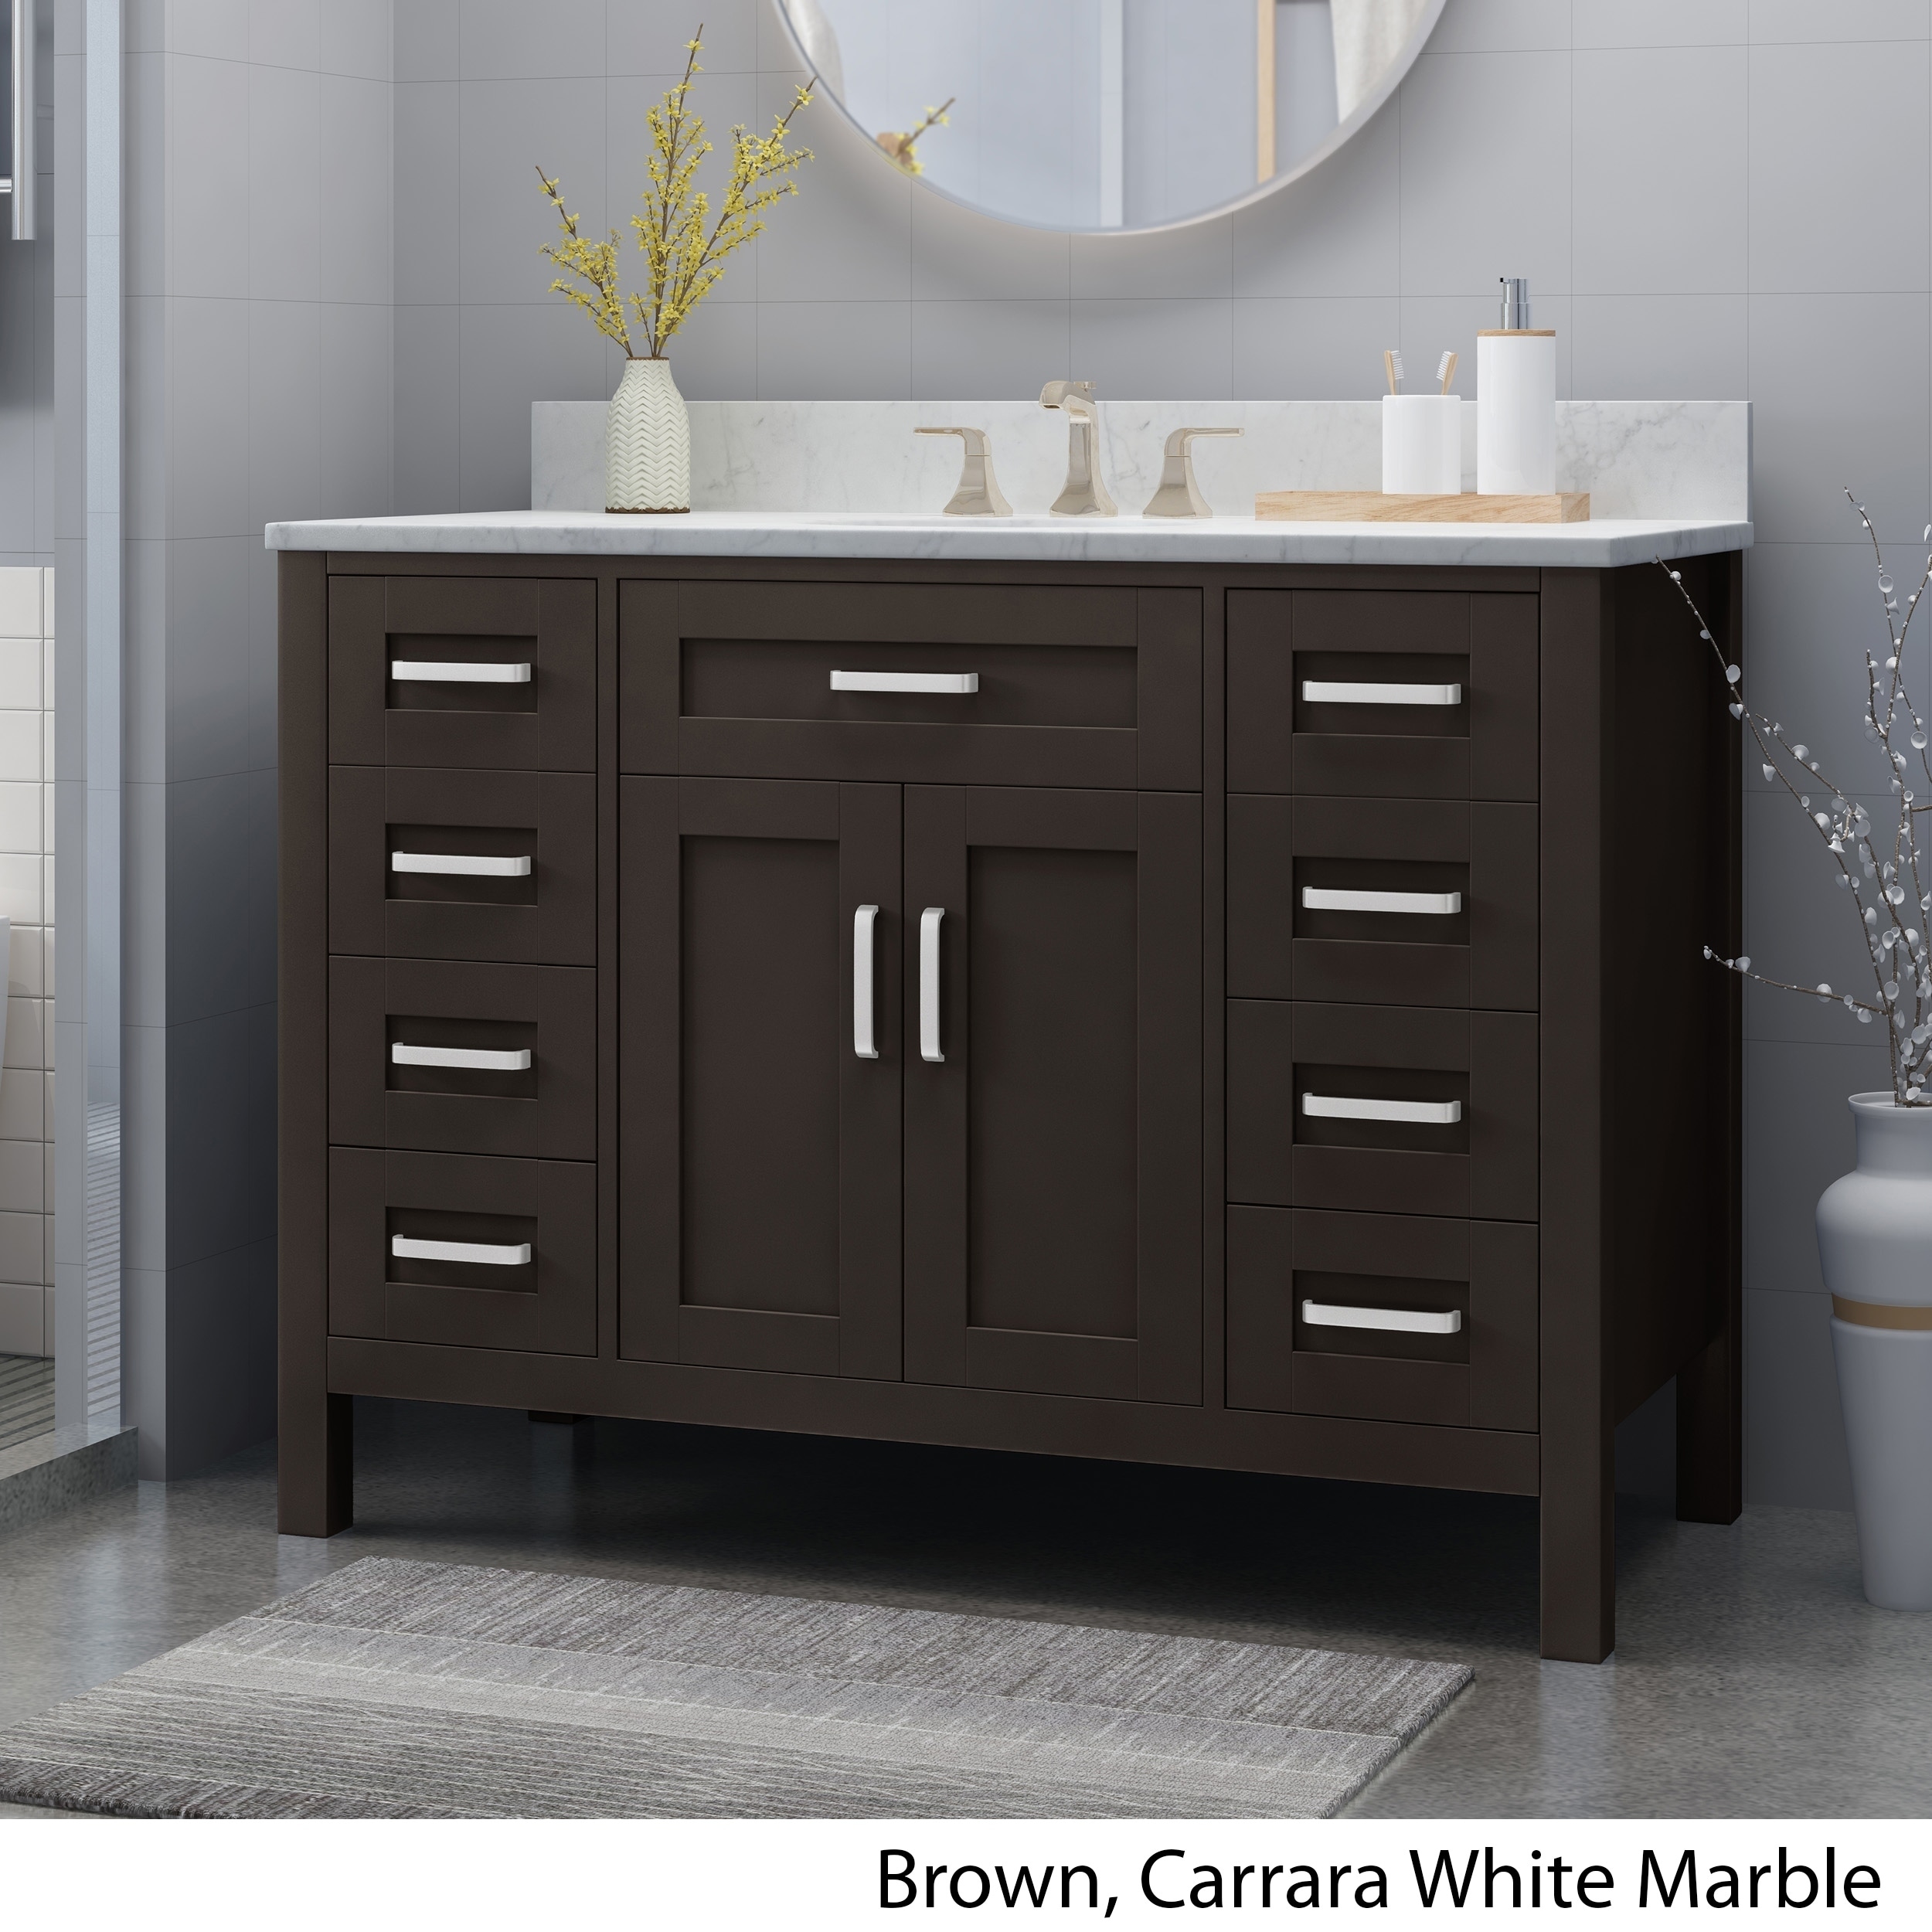 Greeley Contemporary 48 Wood Single Sink Bathroom Vanity With Carrera Marble Top By Christopher Knight Home On Sale Overstock 25716175